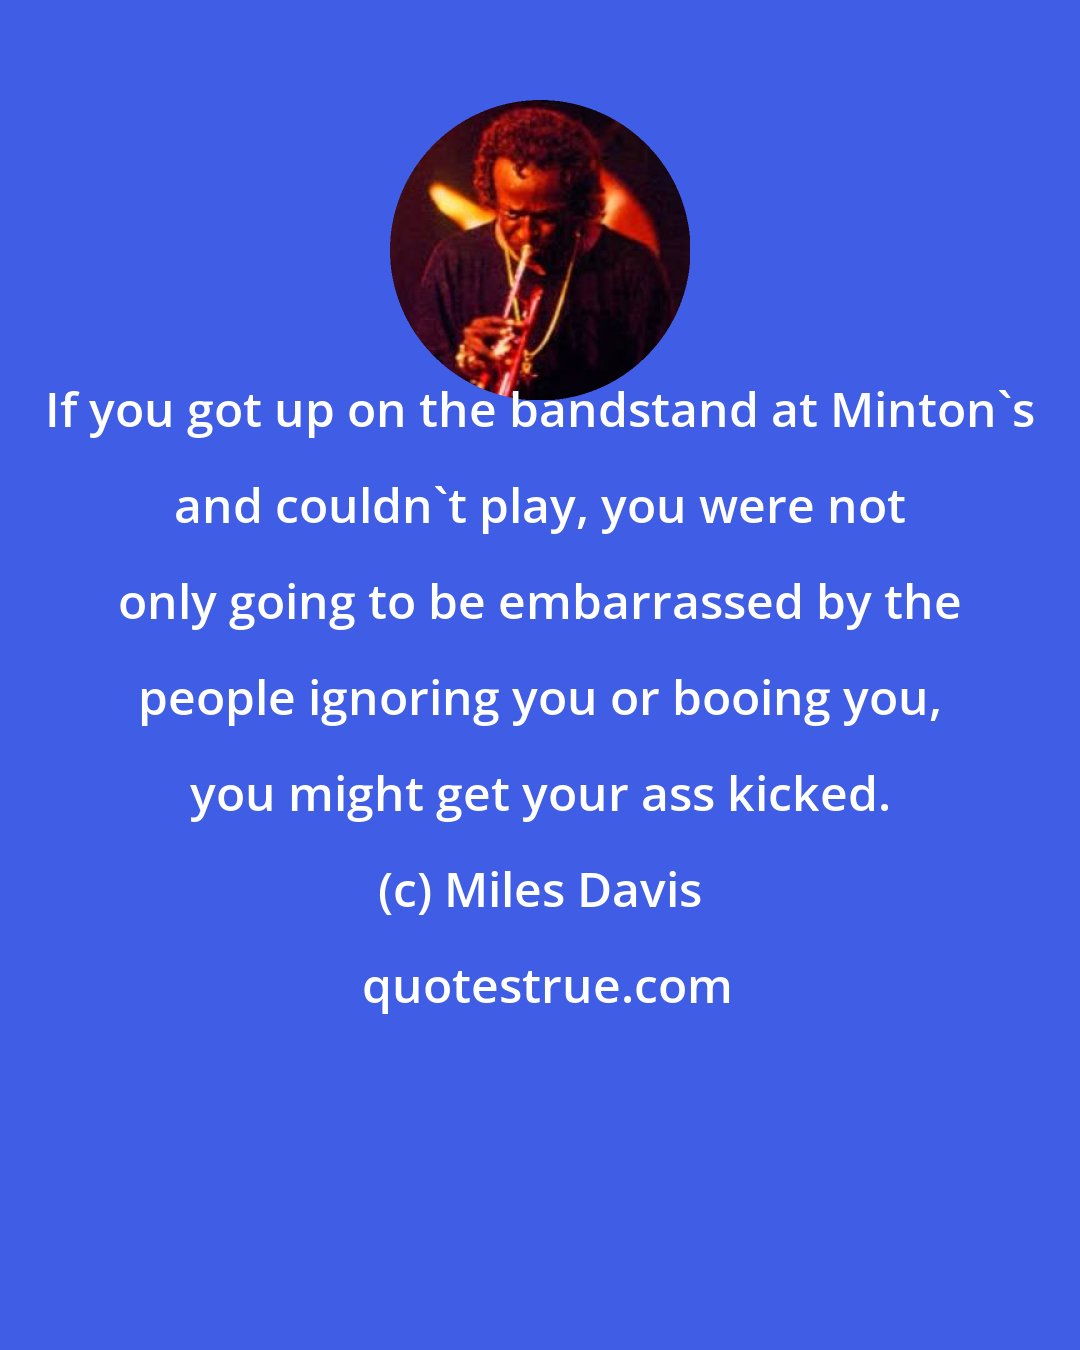 Miles Davis: If you got up on the bandstand at Minton's and couldn't play, you were not only going to be embarrassed by the people ignoring you or booing you, you might get your ass kicked.